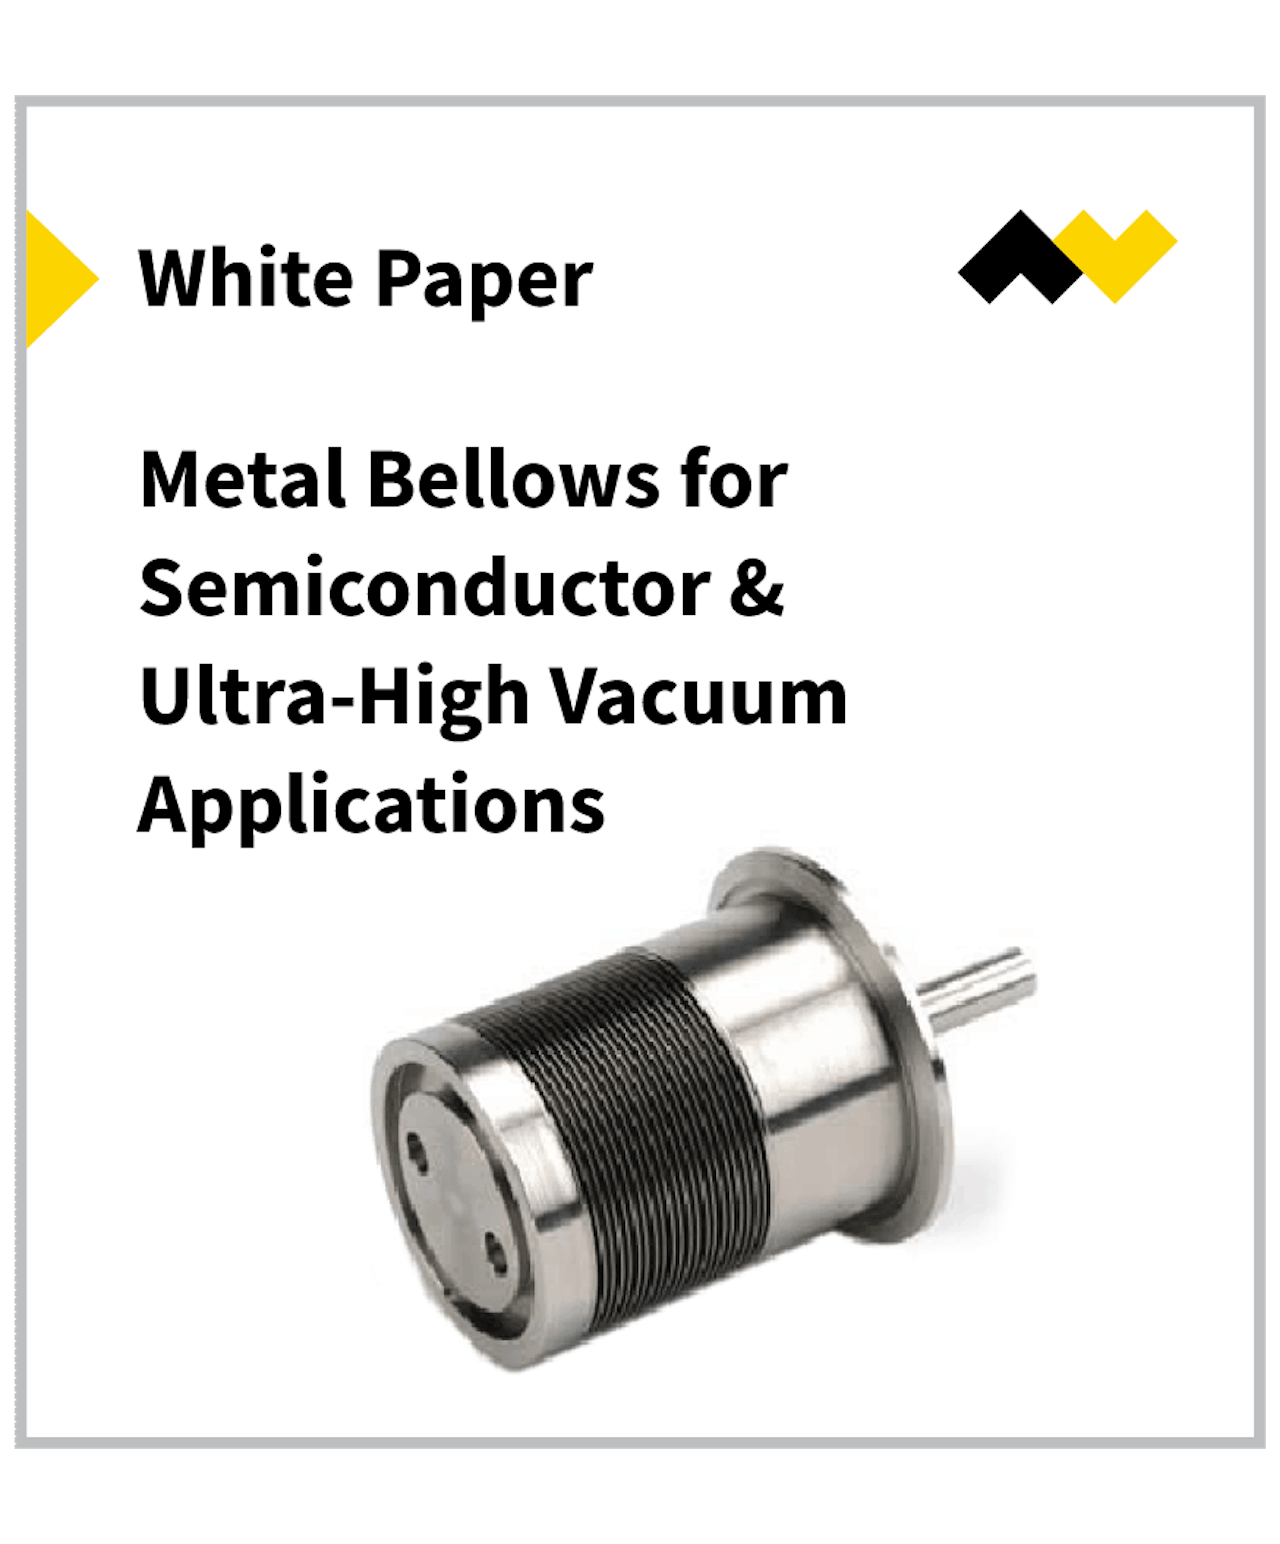 Metal Bellows for Semiconductor White Paper